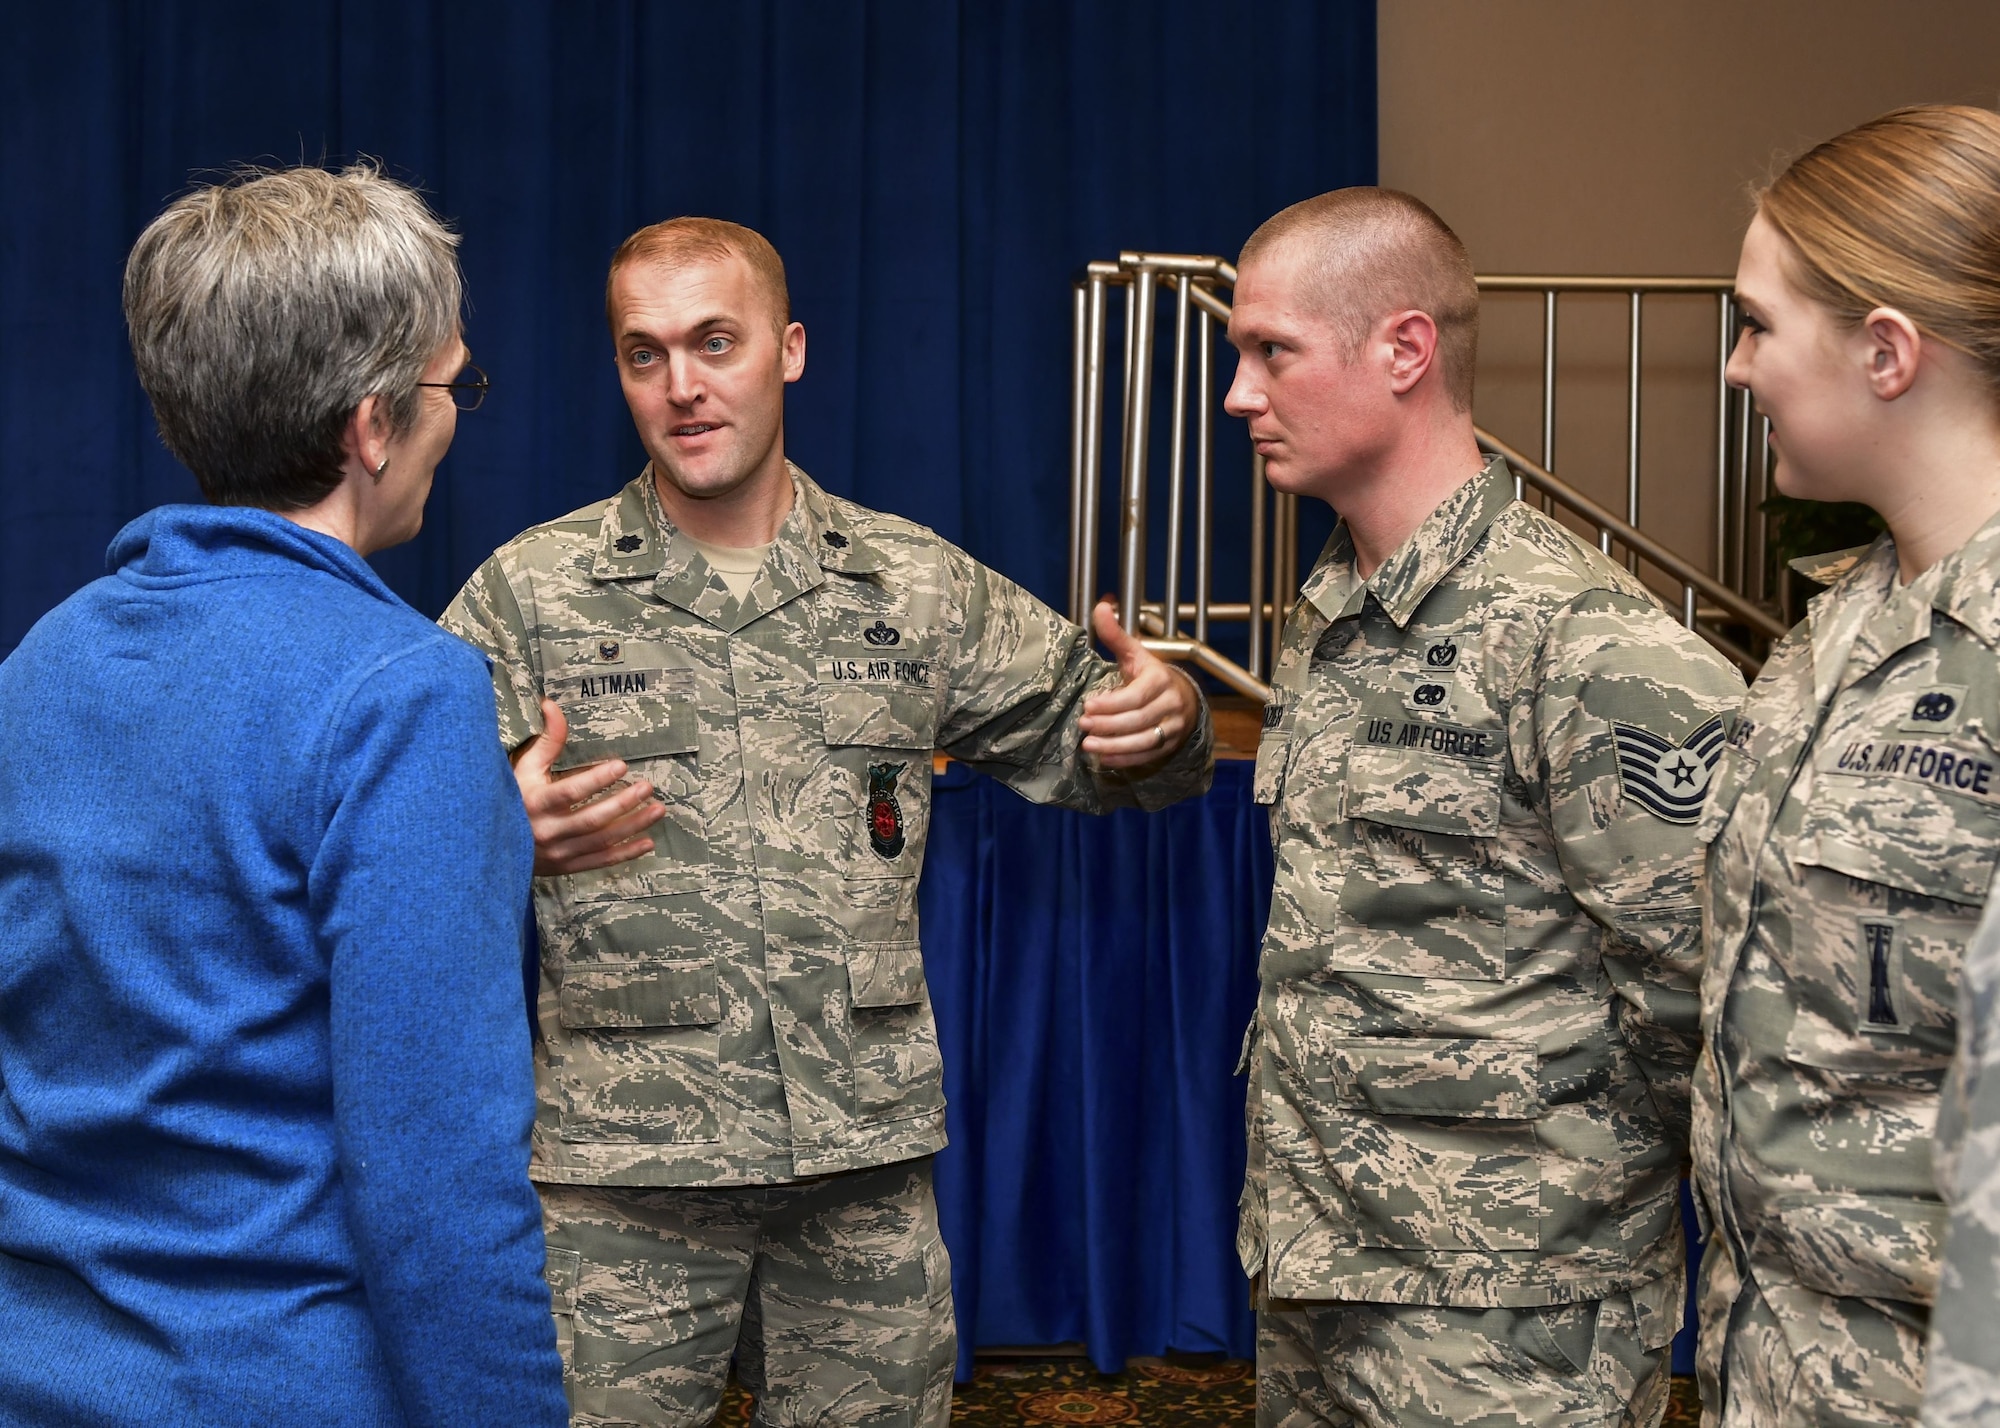 Lt. Col. Matthew "Devil" Altman, 8th Civil Engineering Squadron, speaks to the accomplishments of his troop, Tech. Sgt. Adam Frazier, with Secretary of the Air Force Heather Wilson at Osan Air Base, Republic of Korea, January 29, 2018. Members of the Wolf Pack were recognized as superior performers by Wilson and Goldfein and briefed the senior leaders on the specific mission sets in their respective fields. (U.S. Air Force photo by Staff Sgt. Franklin R. Ramos)